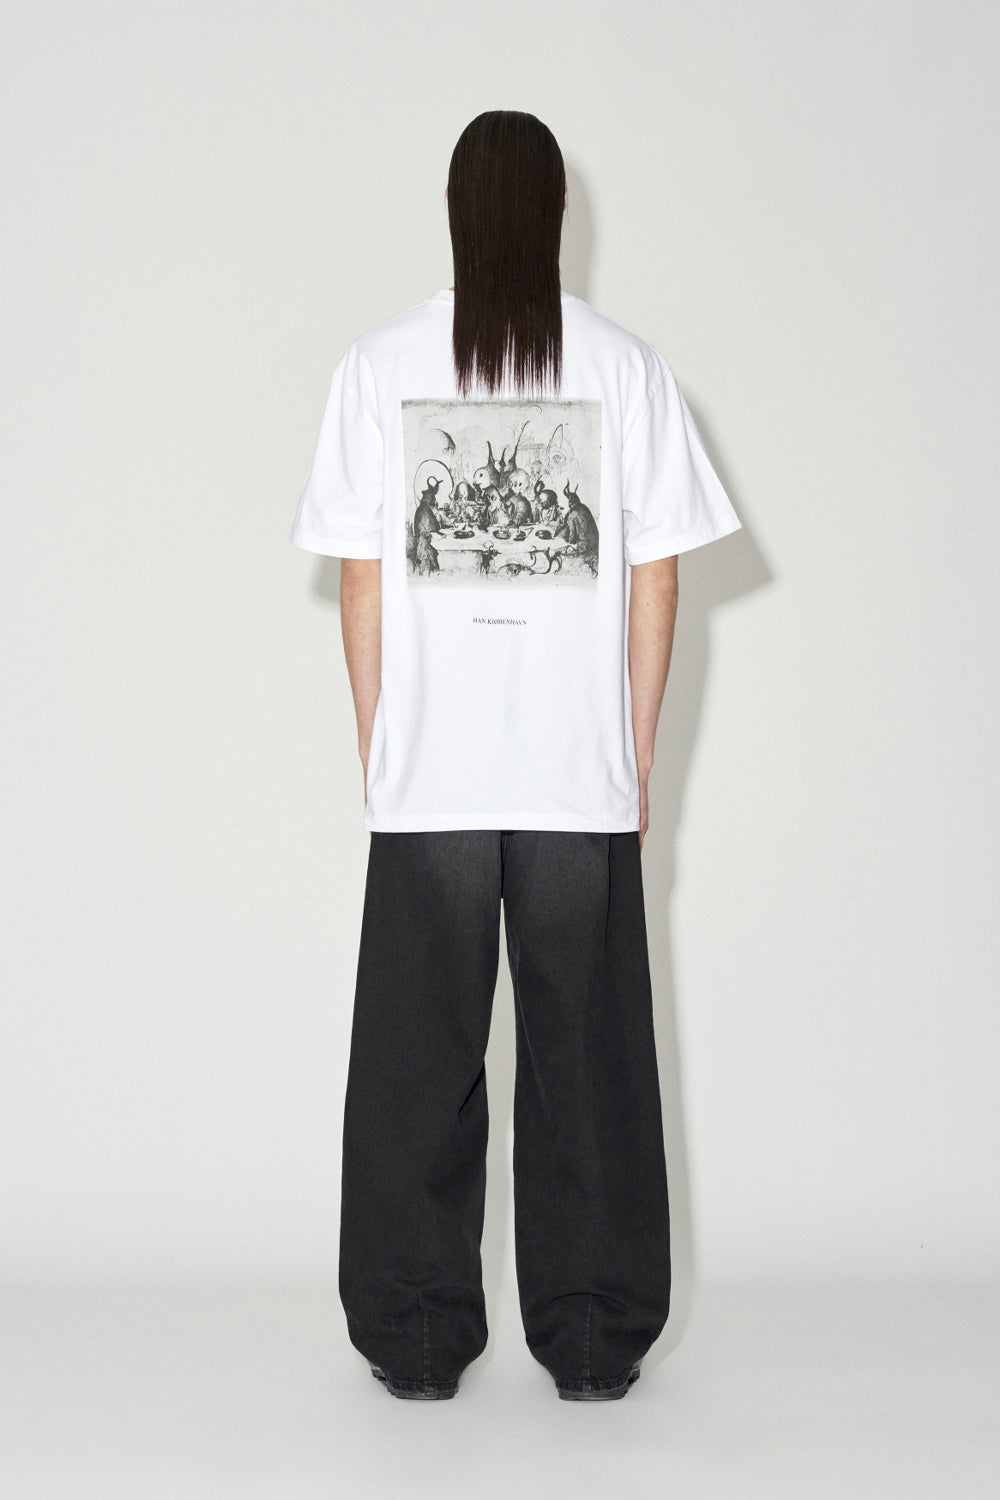 Buy the Han Kjobenhavn Supper Boxy T-Shirt in White at Intro. Spend £50 for free UK delivery. Official stockists. We ship worldwide.